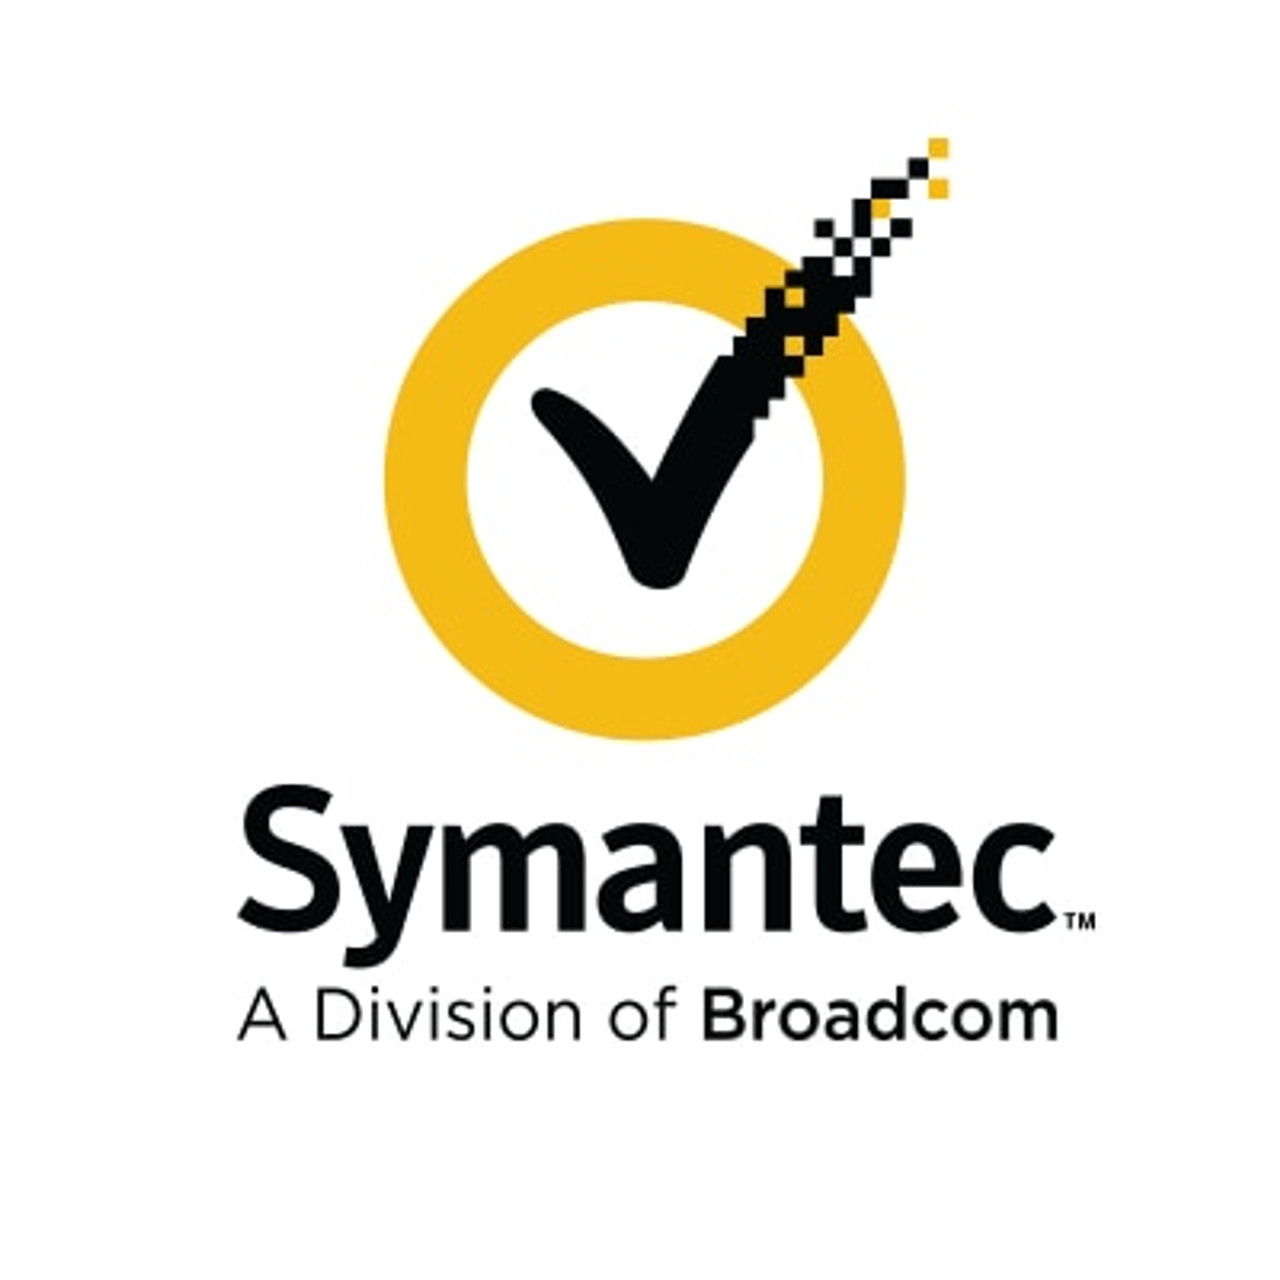 Symantec Complete Endpoint Defense (with SEP), Additional Quantity Hybrid Subscription License with Support, 50,000-99,999 Devices 1 YR